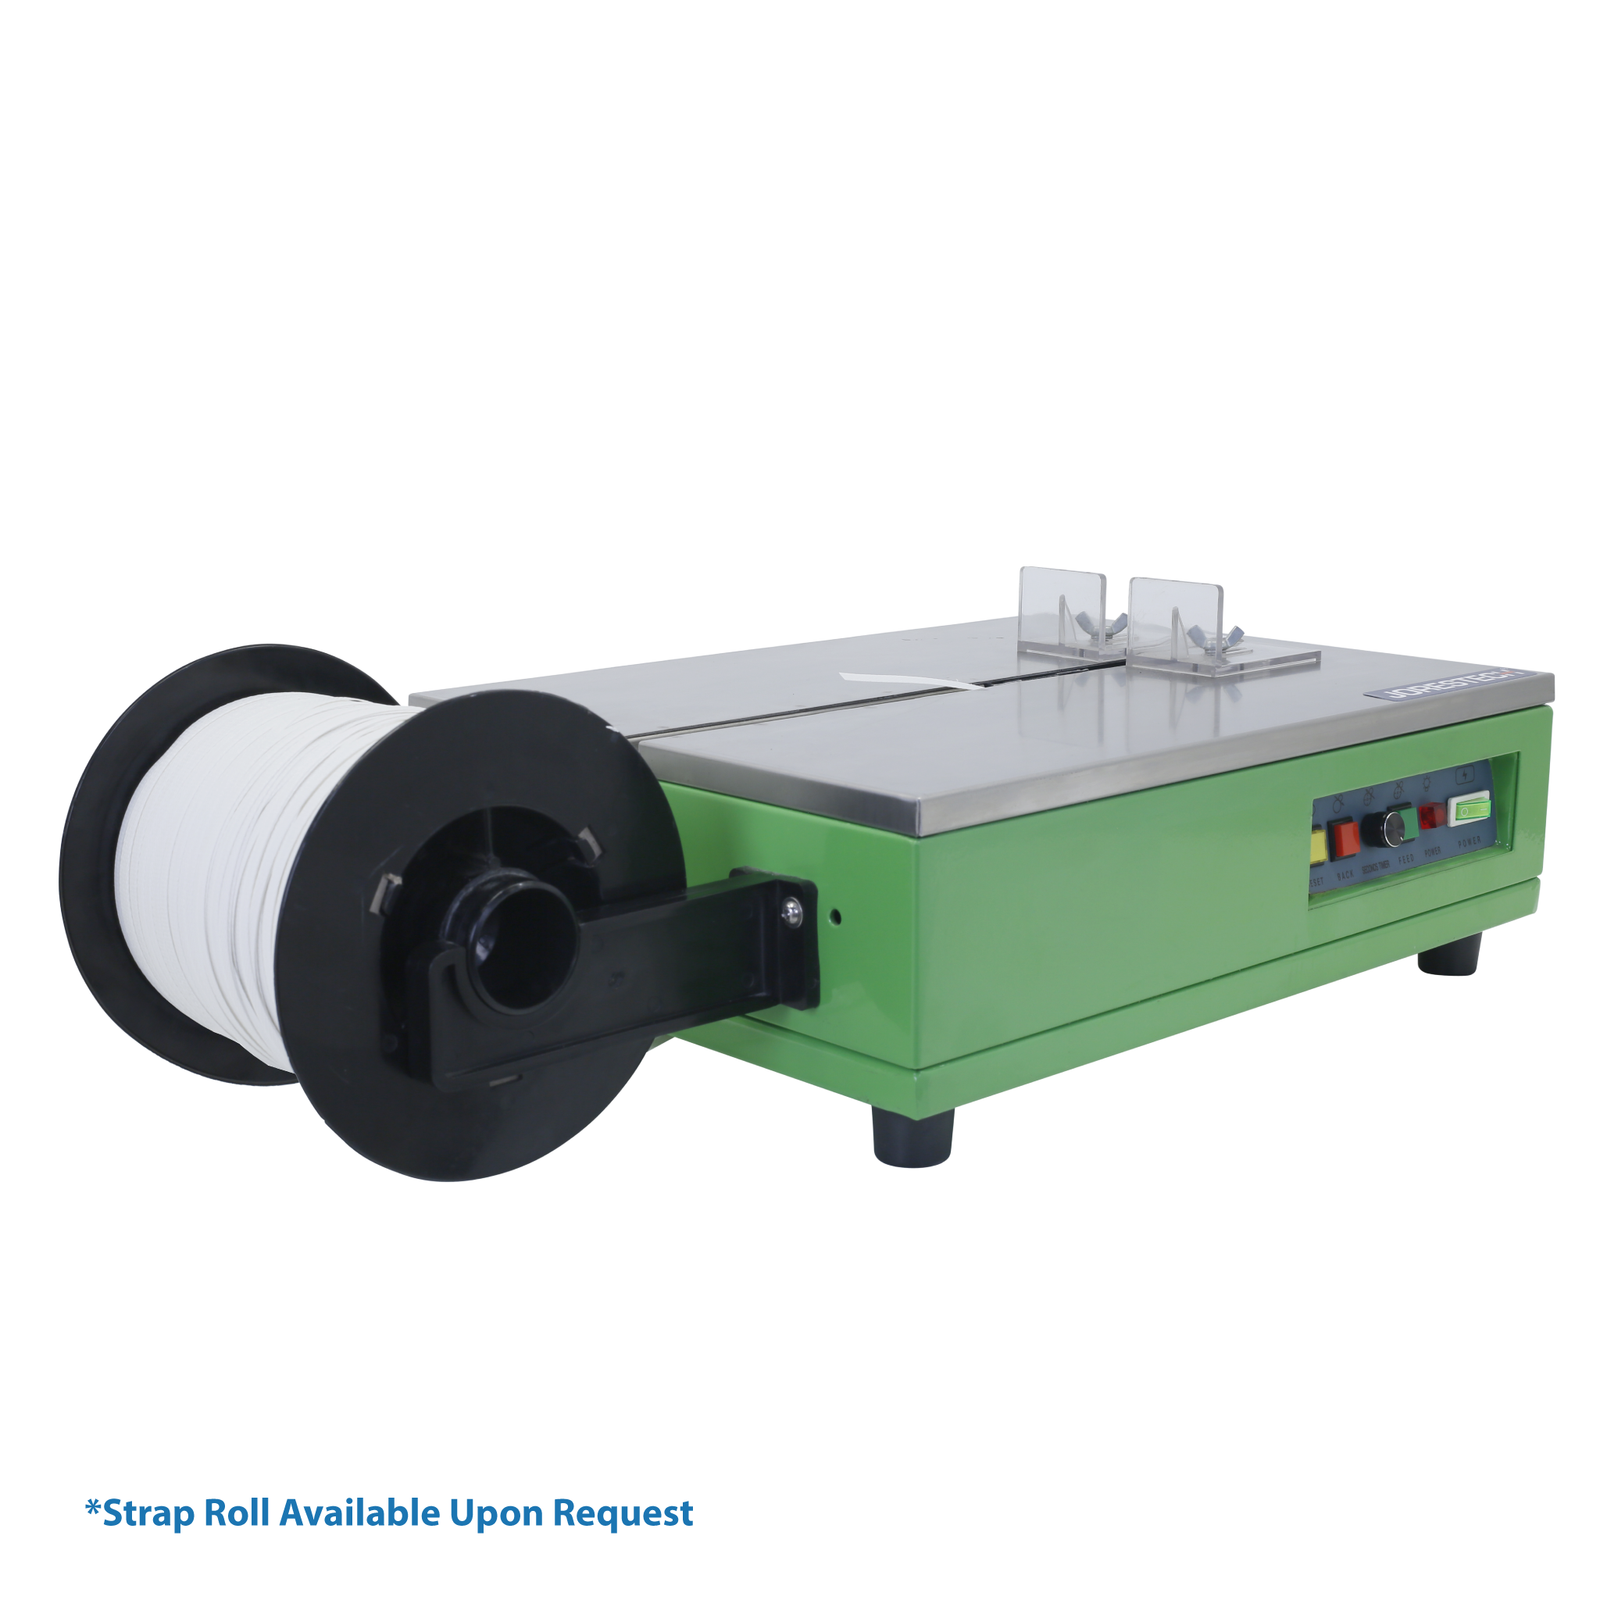 Diagonal view of a green JORES TECHNOLOGIES®  tabletop strapping machine. A strapping roll has been mounted on the machine and a small text in blue letters on the lower left corner says strap roll available upon request